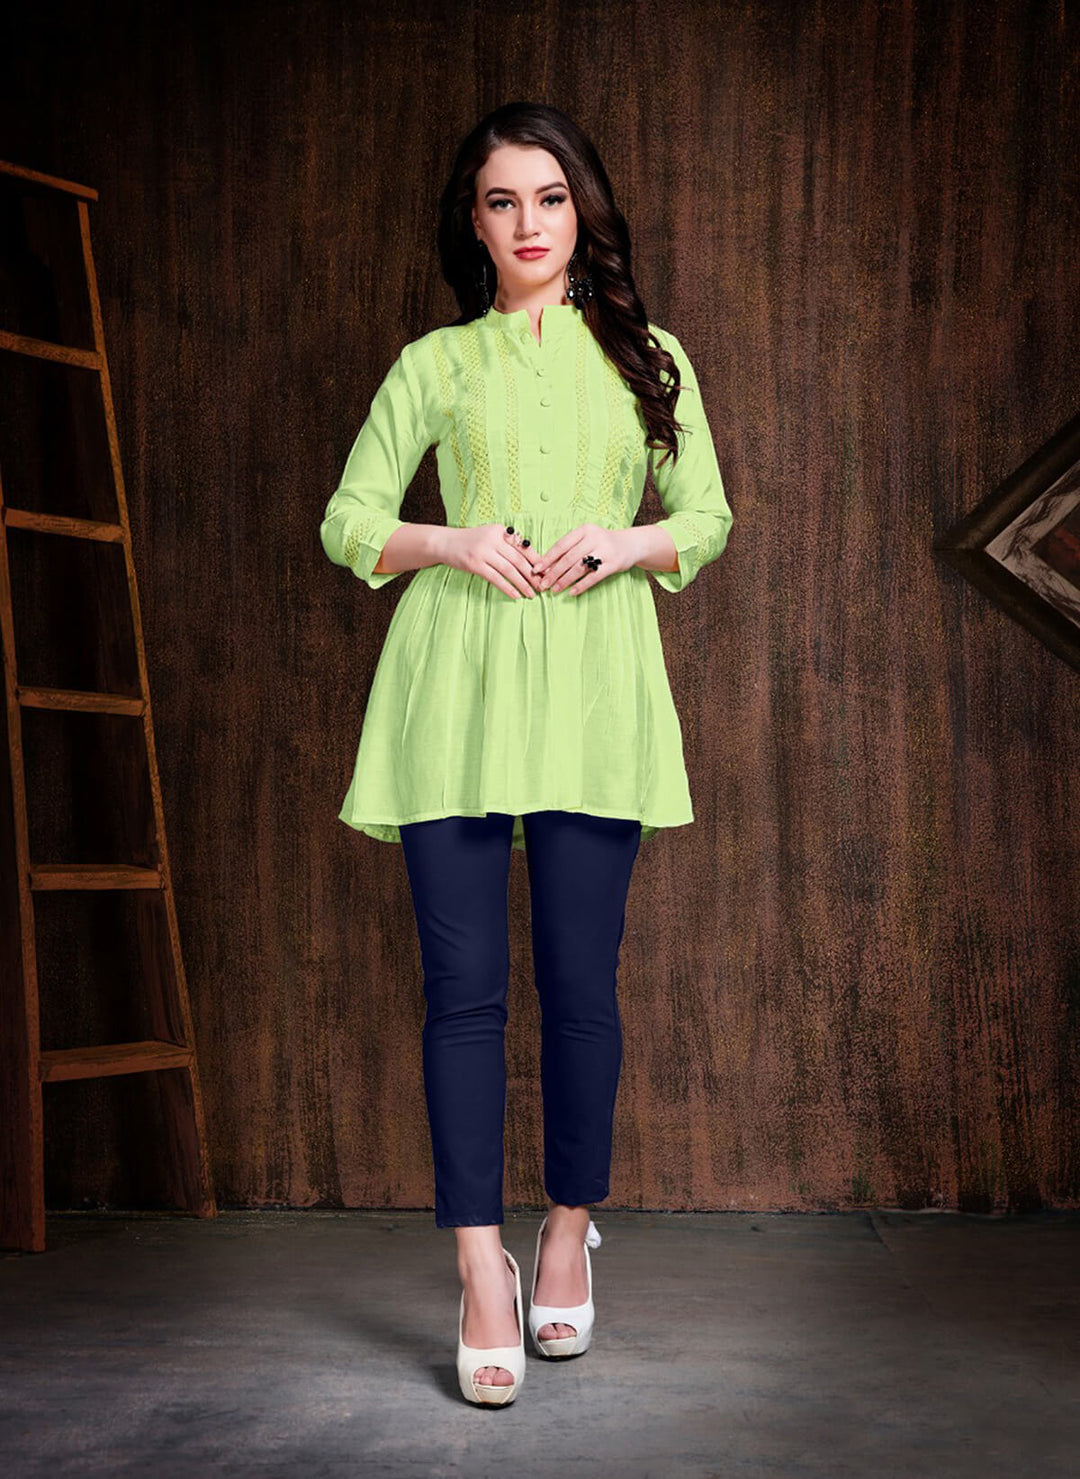 Buy Aasin Designer Peach, Pink, Yellow, Parrot Green Top tunic